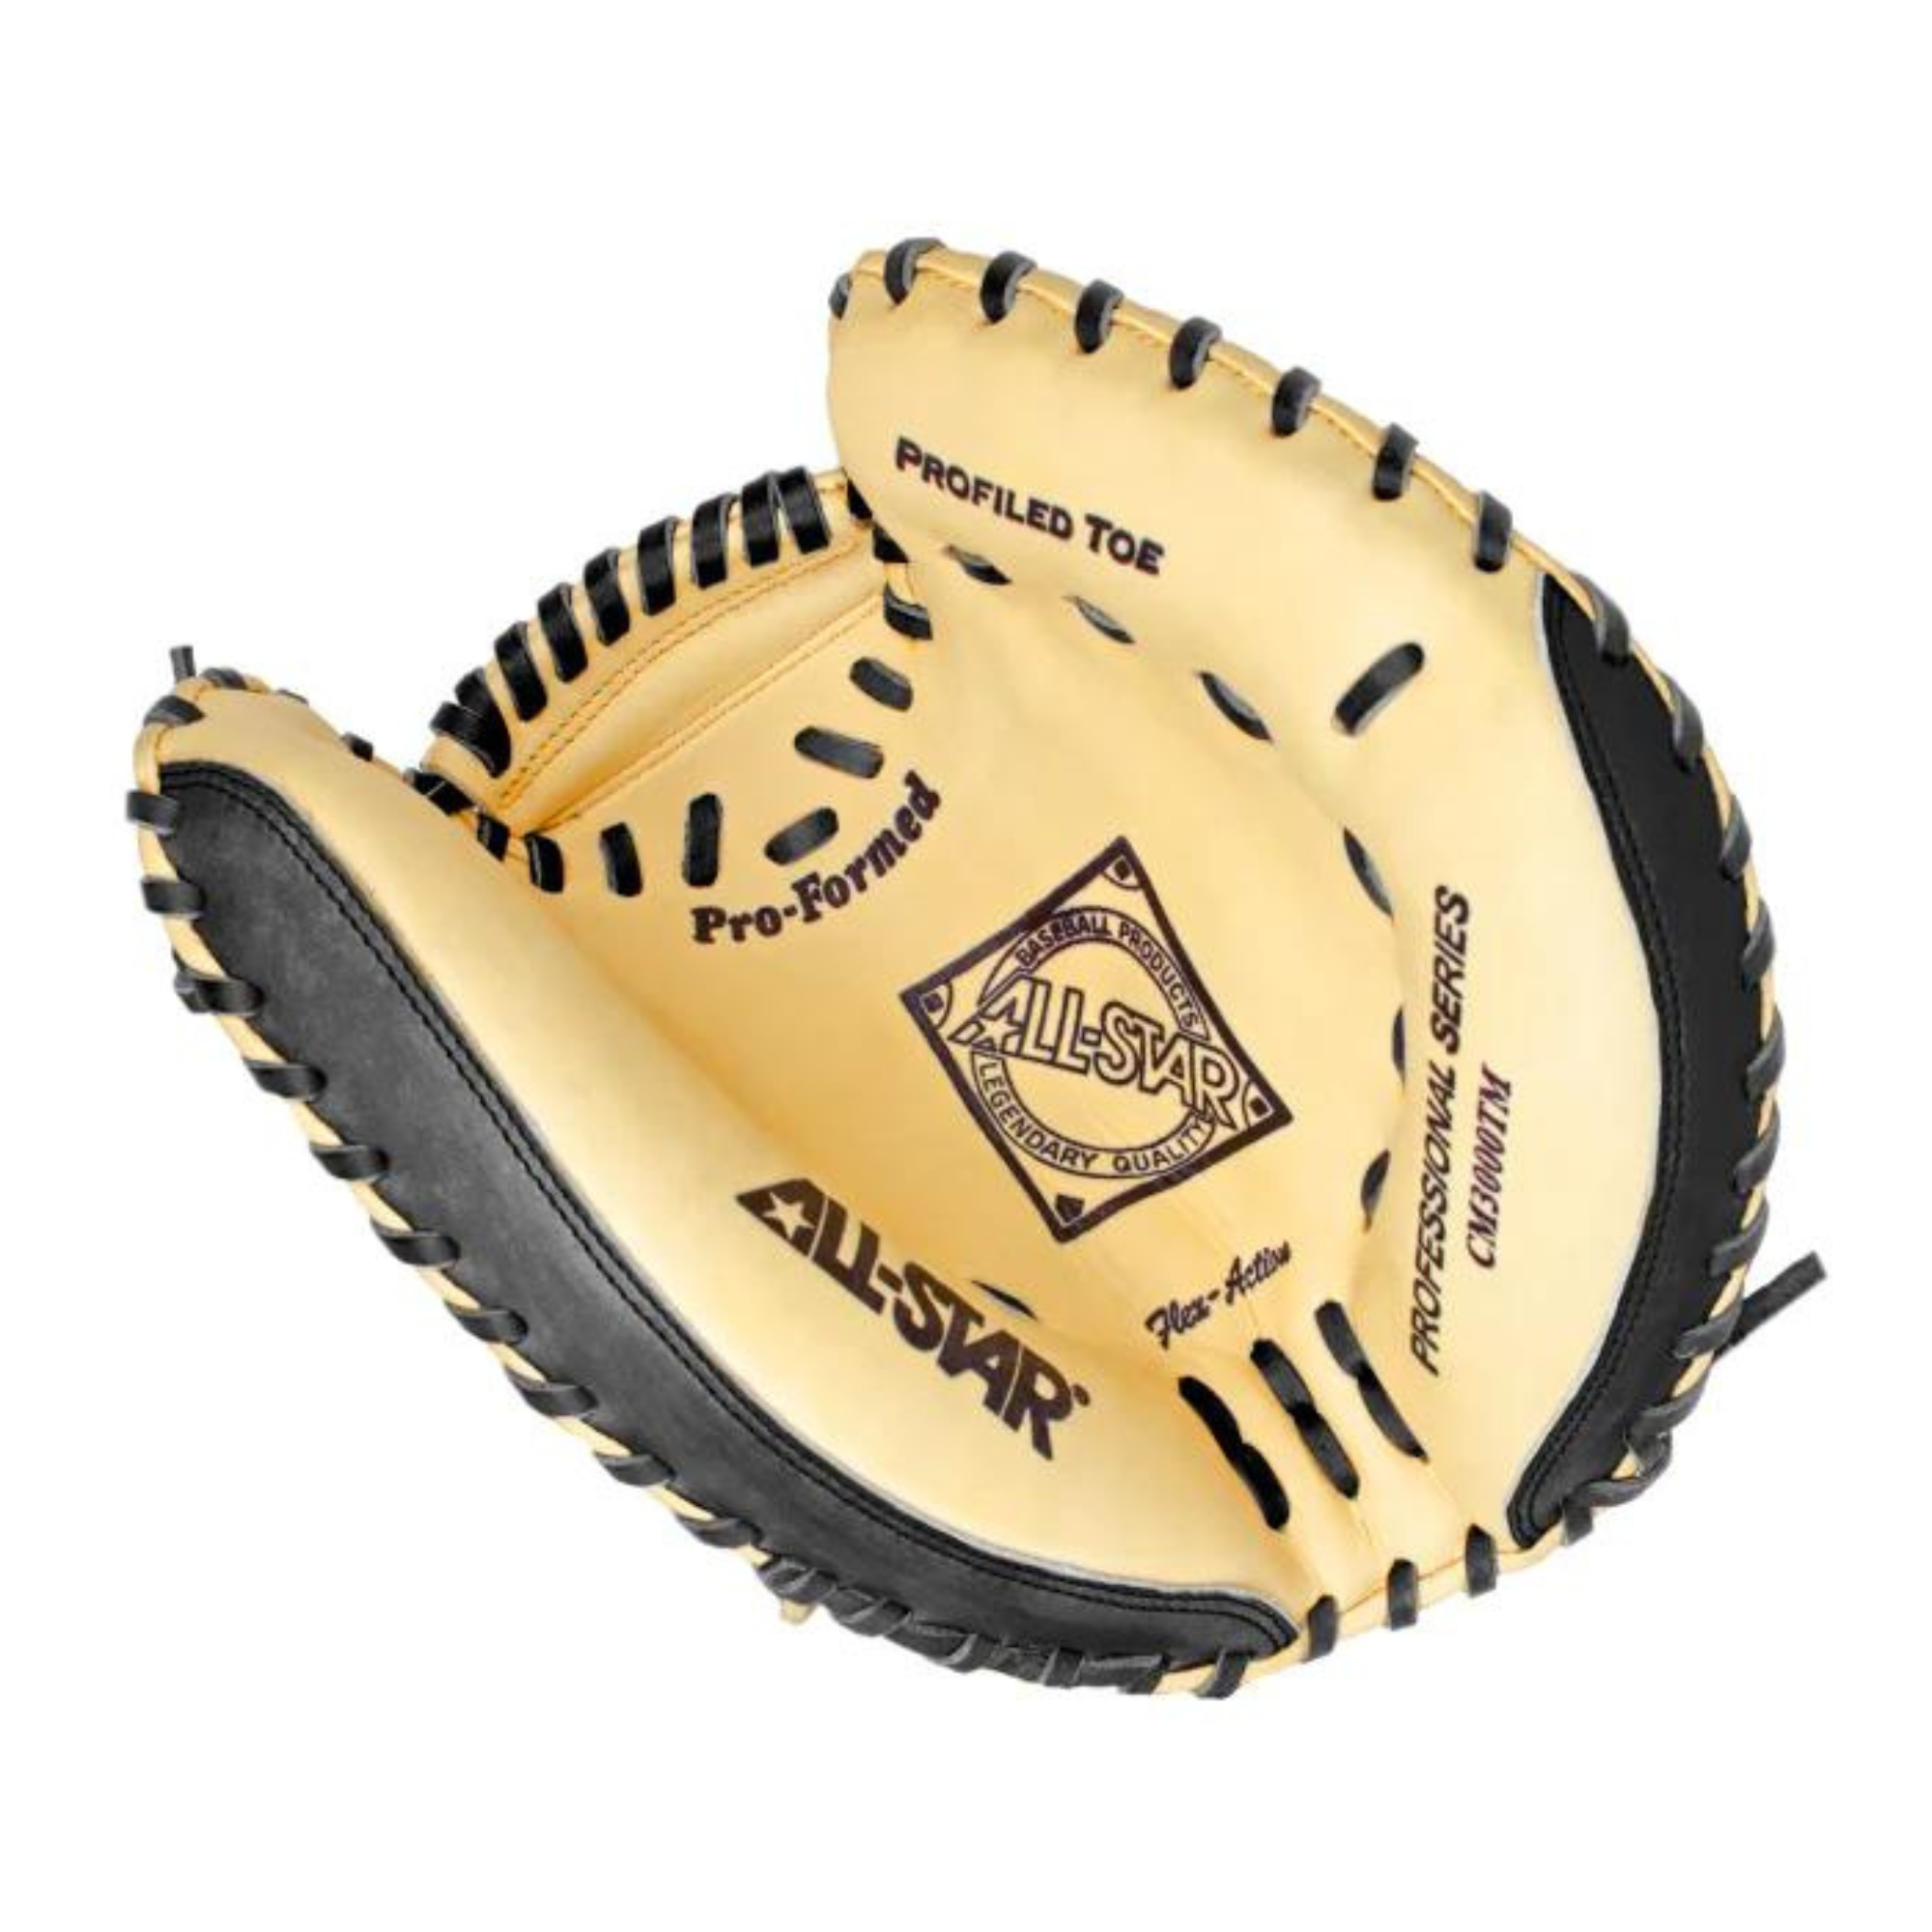 All-Star Training Glove / The Equalizer